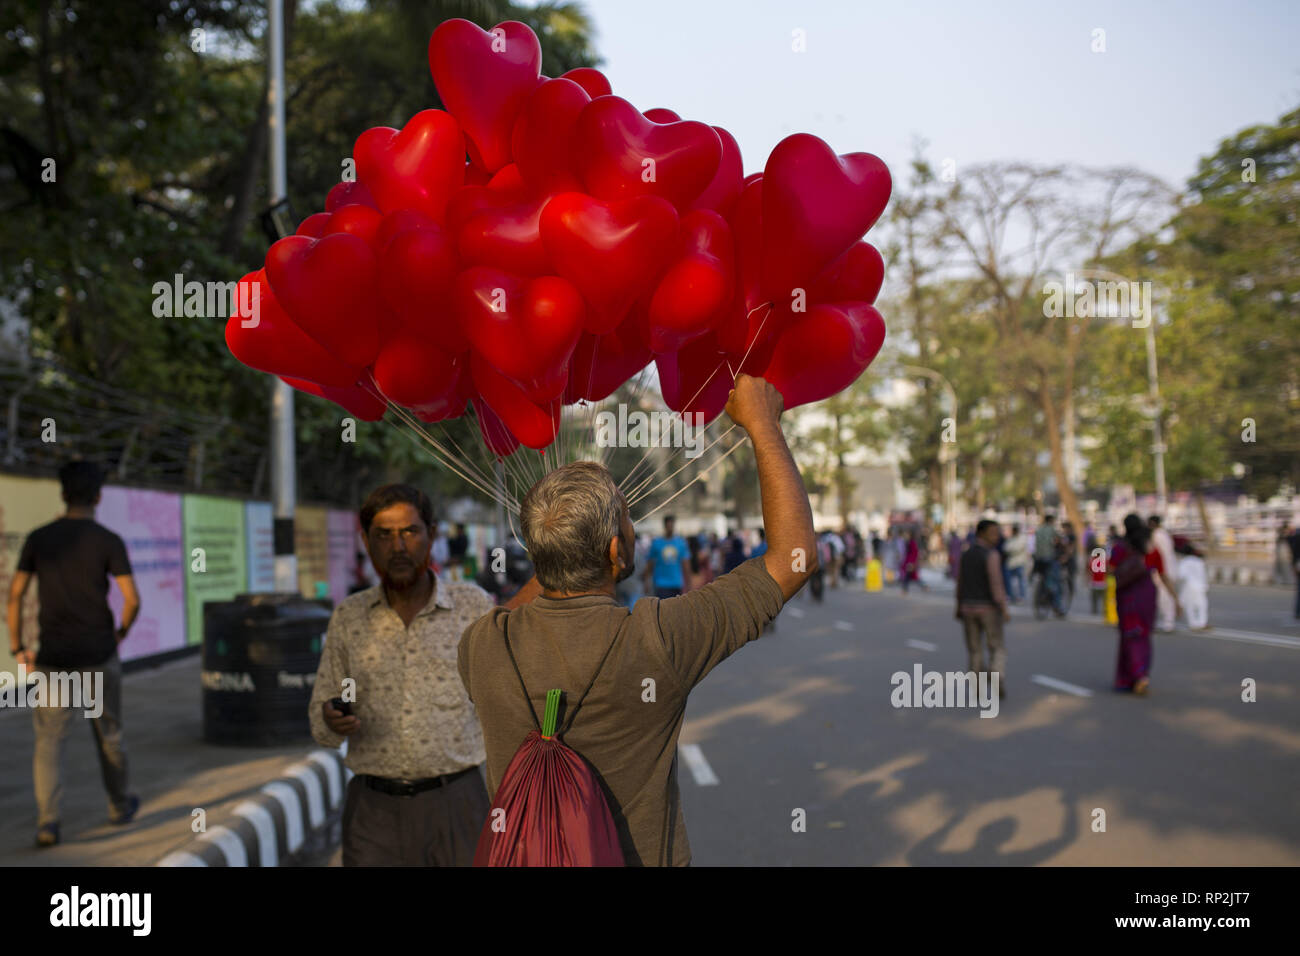 Dhaka, Bangladesh. 20th Feb, 2019. FEBRUARY 20 : A hawker sells red balloon in front of the language matyrs monument in Dhaka, Bangladesh on February 20, 2019.The nation will pay tribute to the Bangla language movement martyrs who sacrificed their life for their mother tongue in 1952, while the United Nations Educational Scientific and Cultural Organization (UNESCO) declared 21 February as the International Mother Language Day. Credit: Zakir Hossain Chowdhury/ZUMA Wire/Alamy Live News Stock Photo